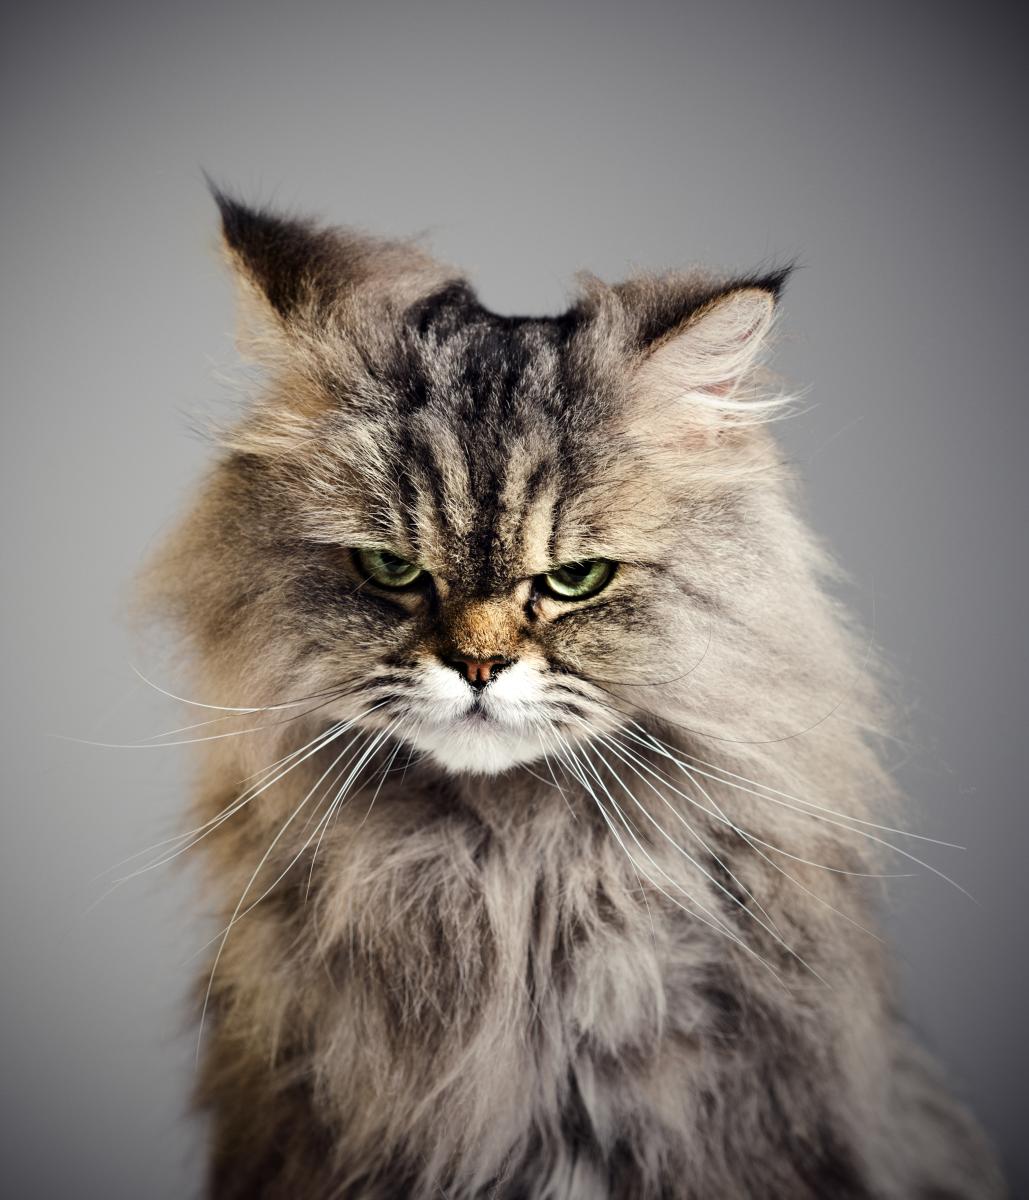 An angry-looking cat stares into the camera.